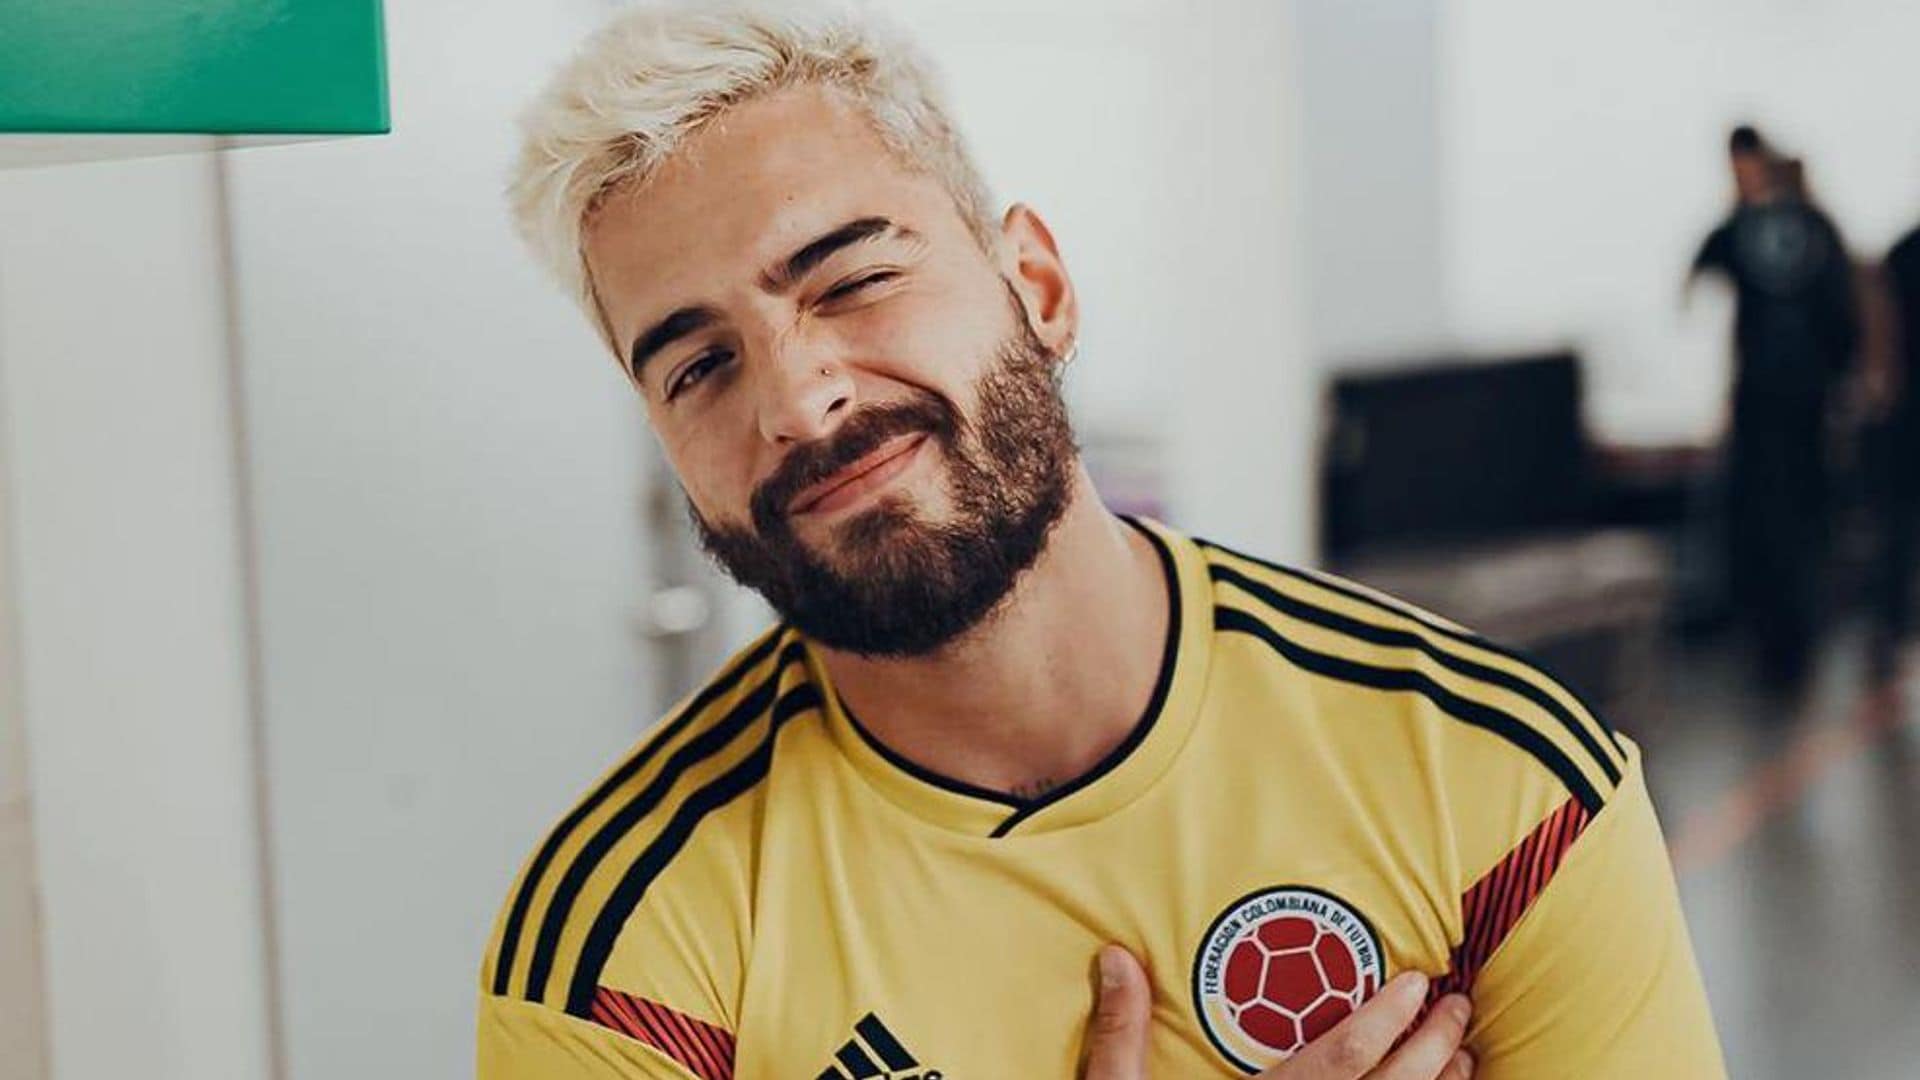 Maluma gifts his abuelo with a donkey – and you won’t stop smiling when you see the sweet pic